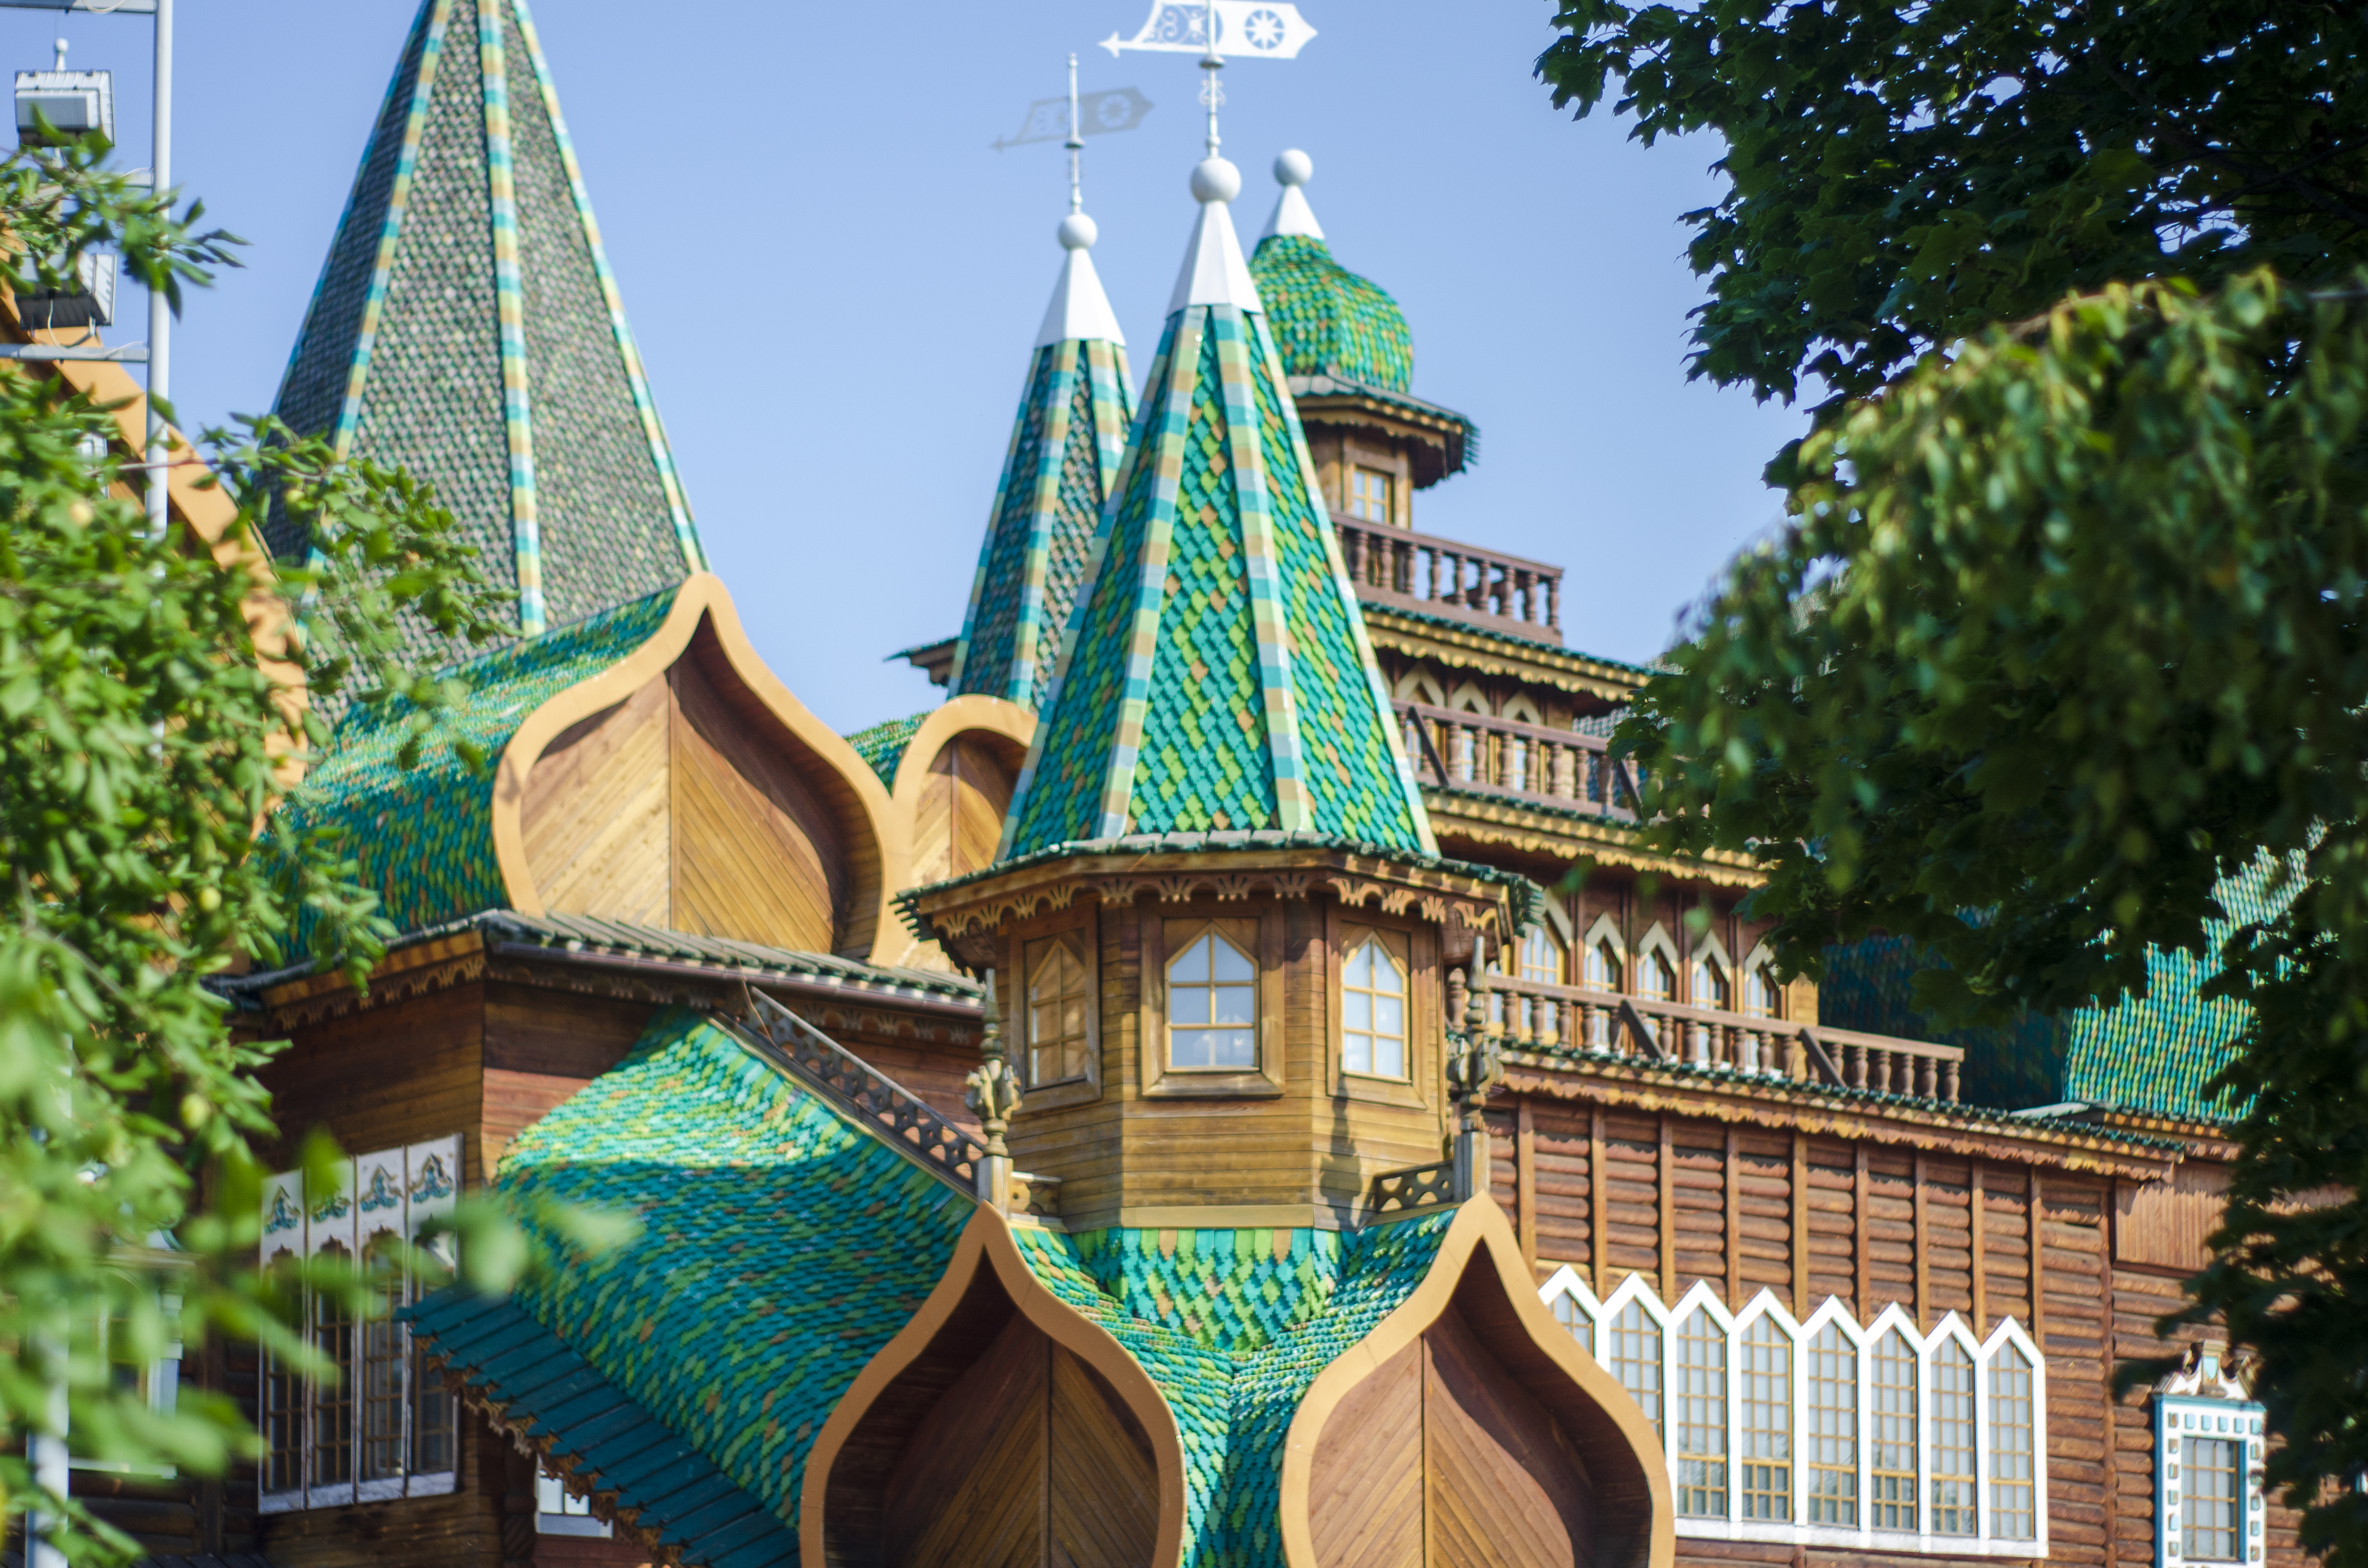 Castle Moscow Wood Architecture 4928x3264